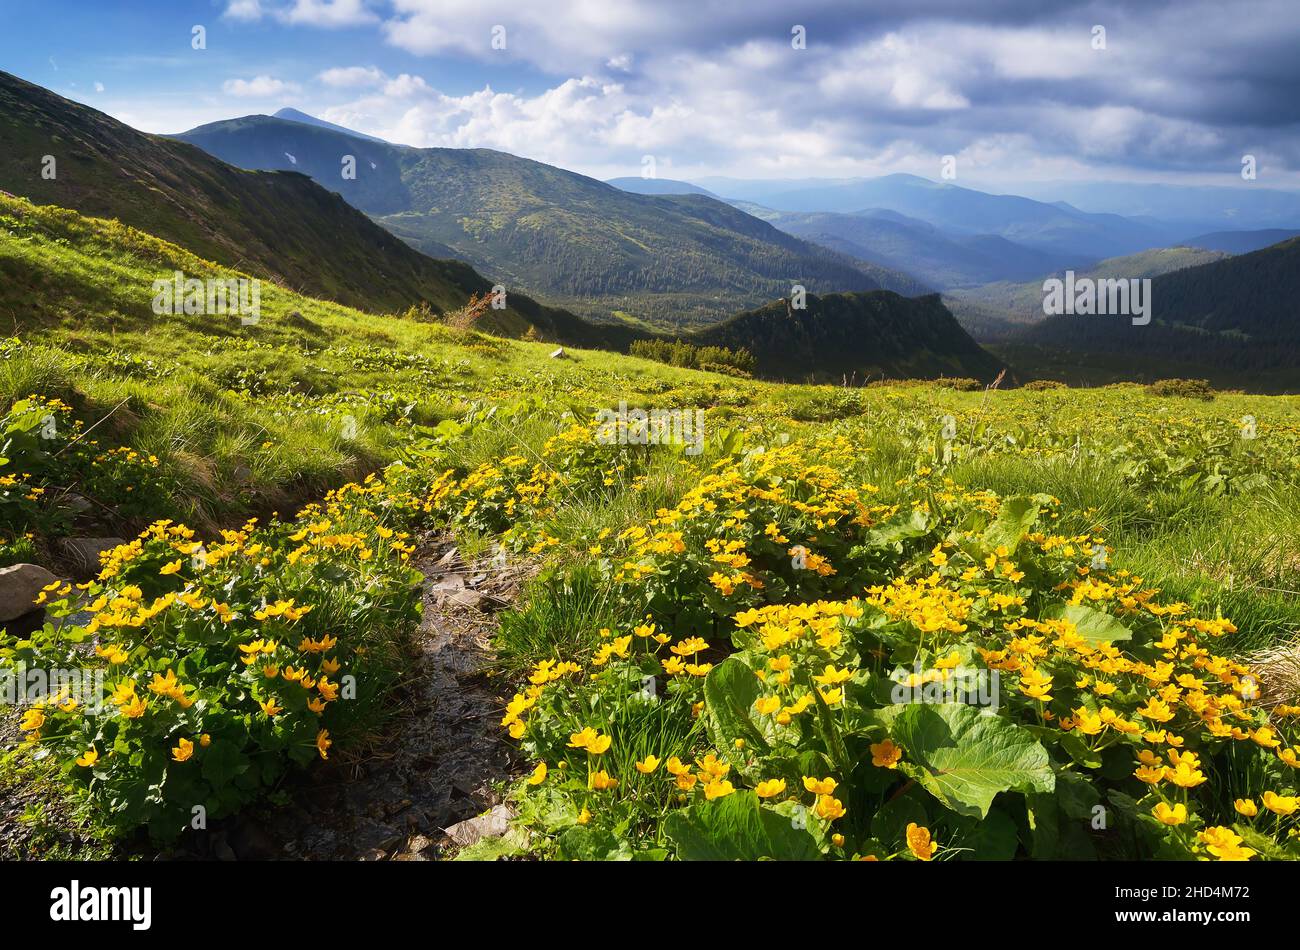 Summer landscape with yellow flowers in a mountain valley. Carpathians, Ukraine, Europe Stock Photo